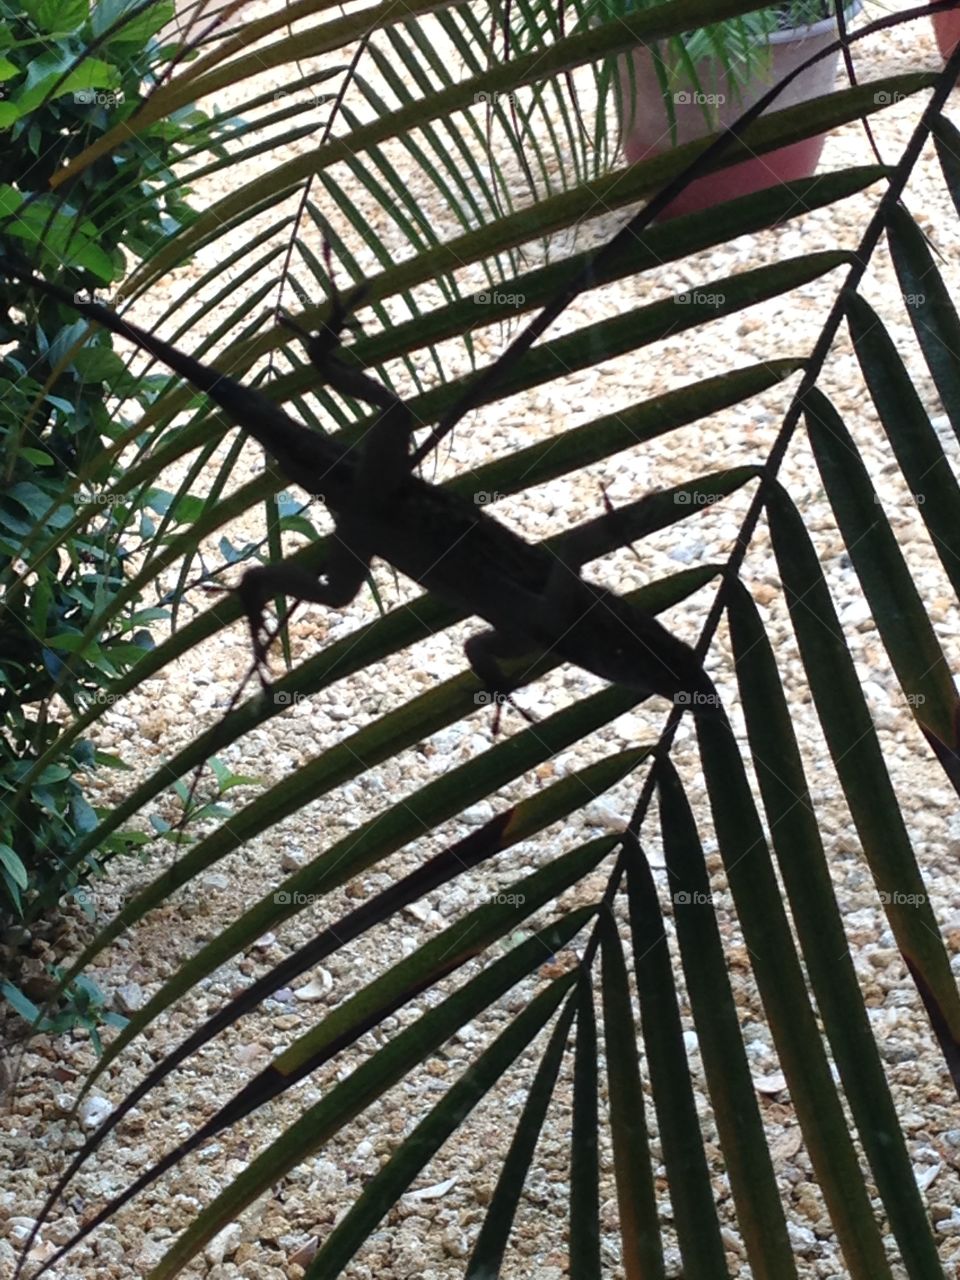 Shadow Lizard. Just hanging out in the shade